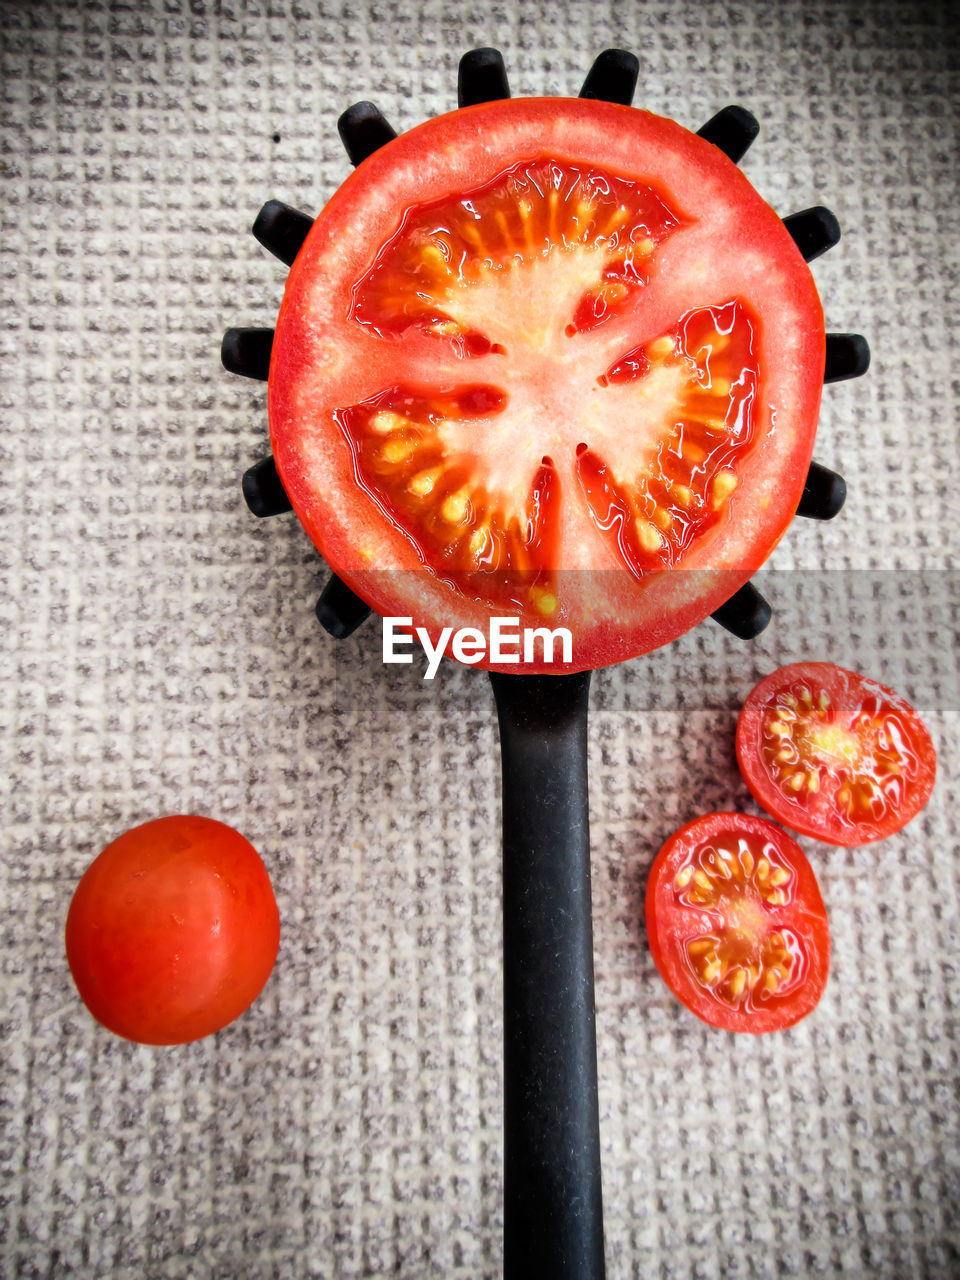 Half tomato on a toothed kitchen spoon on a gray ground. vertical image.